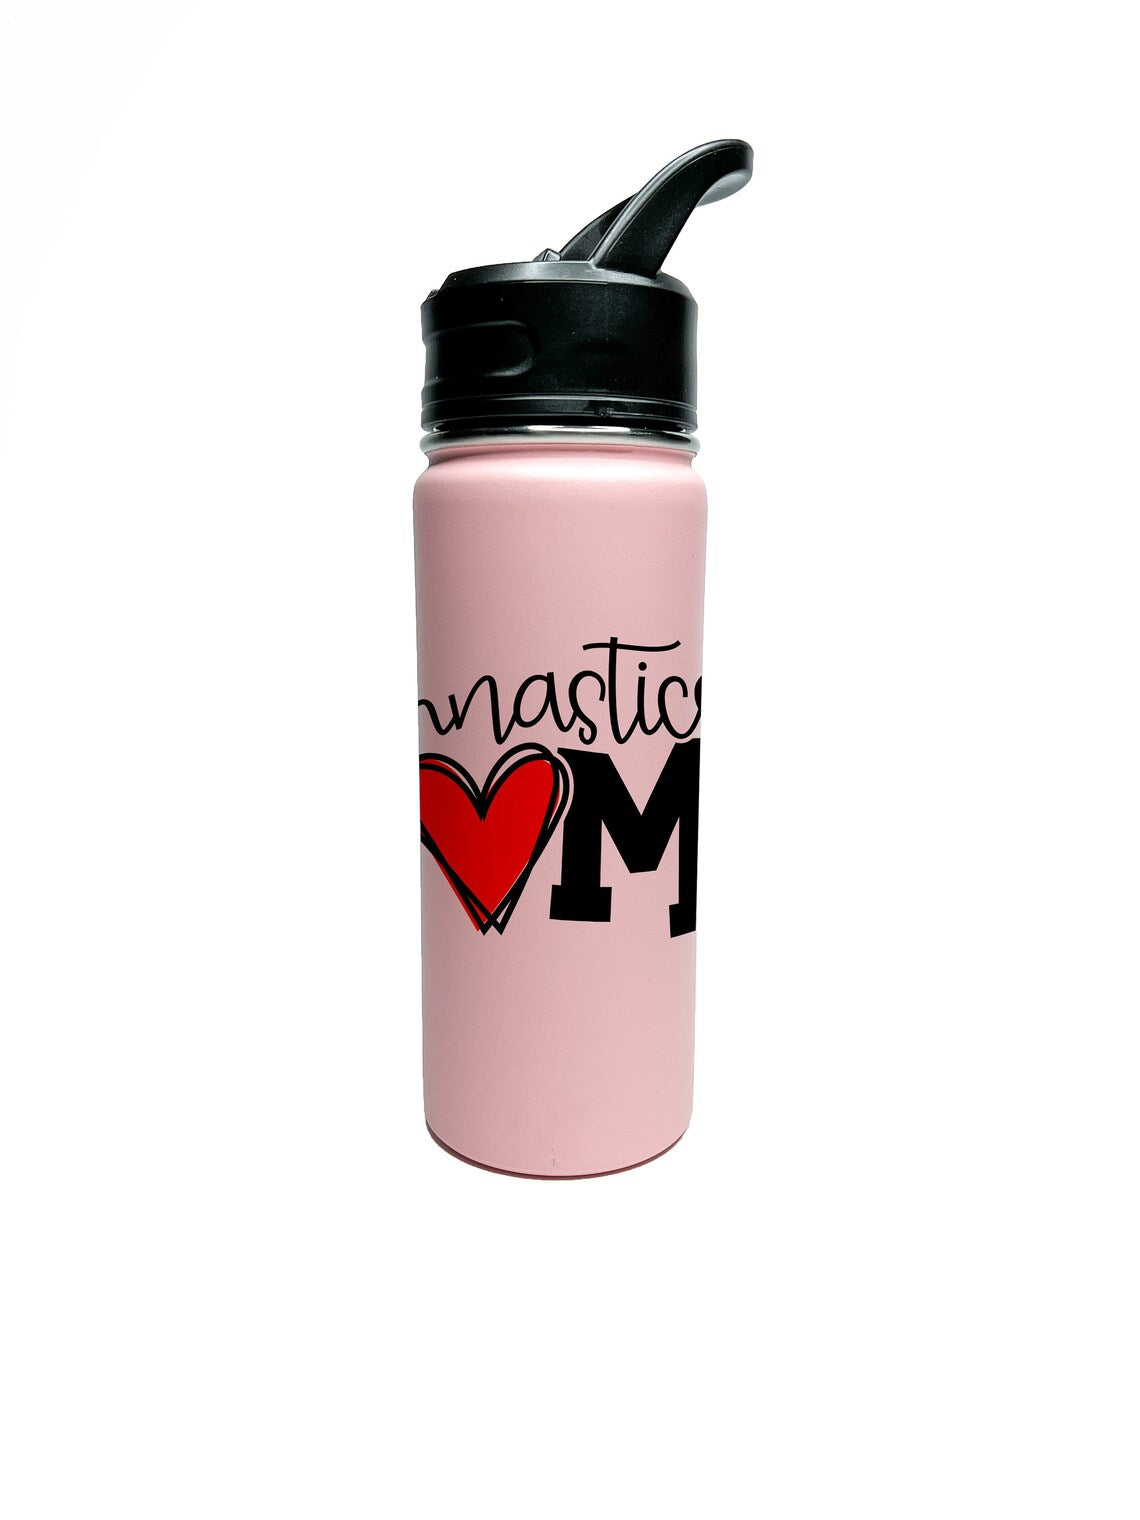 Gymnastics Mom Sports Water Bottle 18/32 oz Stainless Steel Insulated Flasks